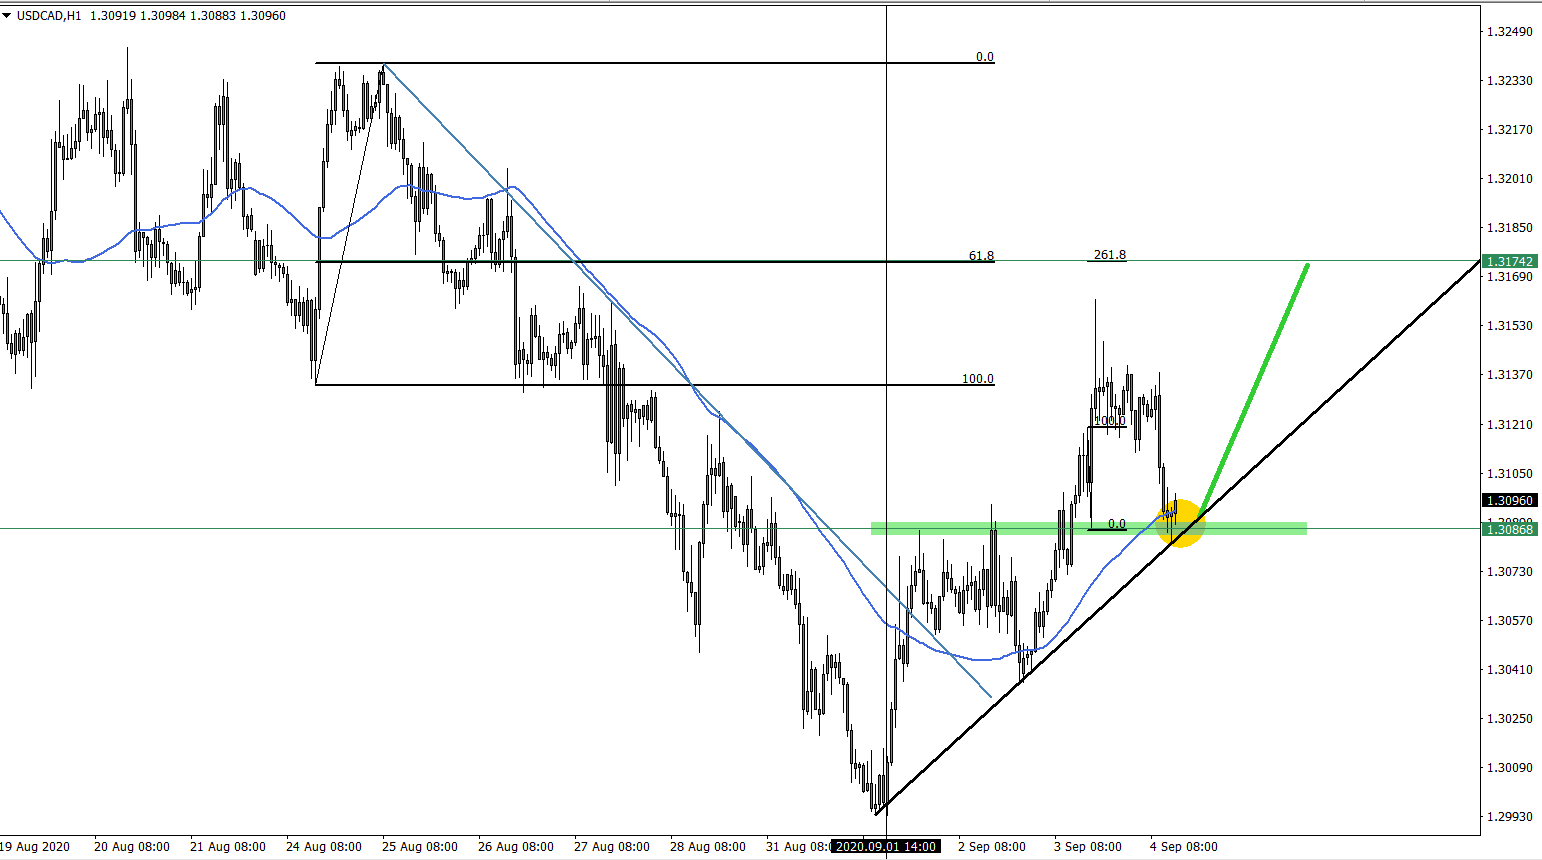 USDCAD hourly chart september 9th 2020